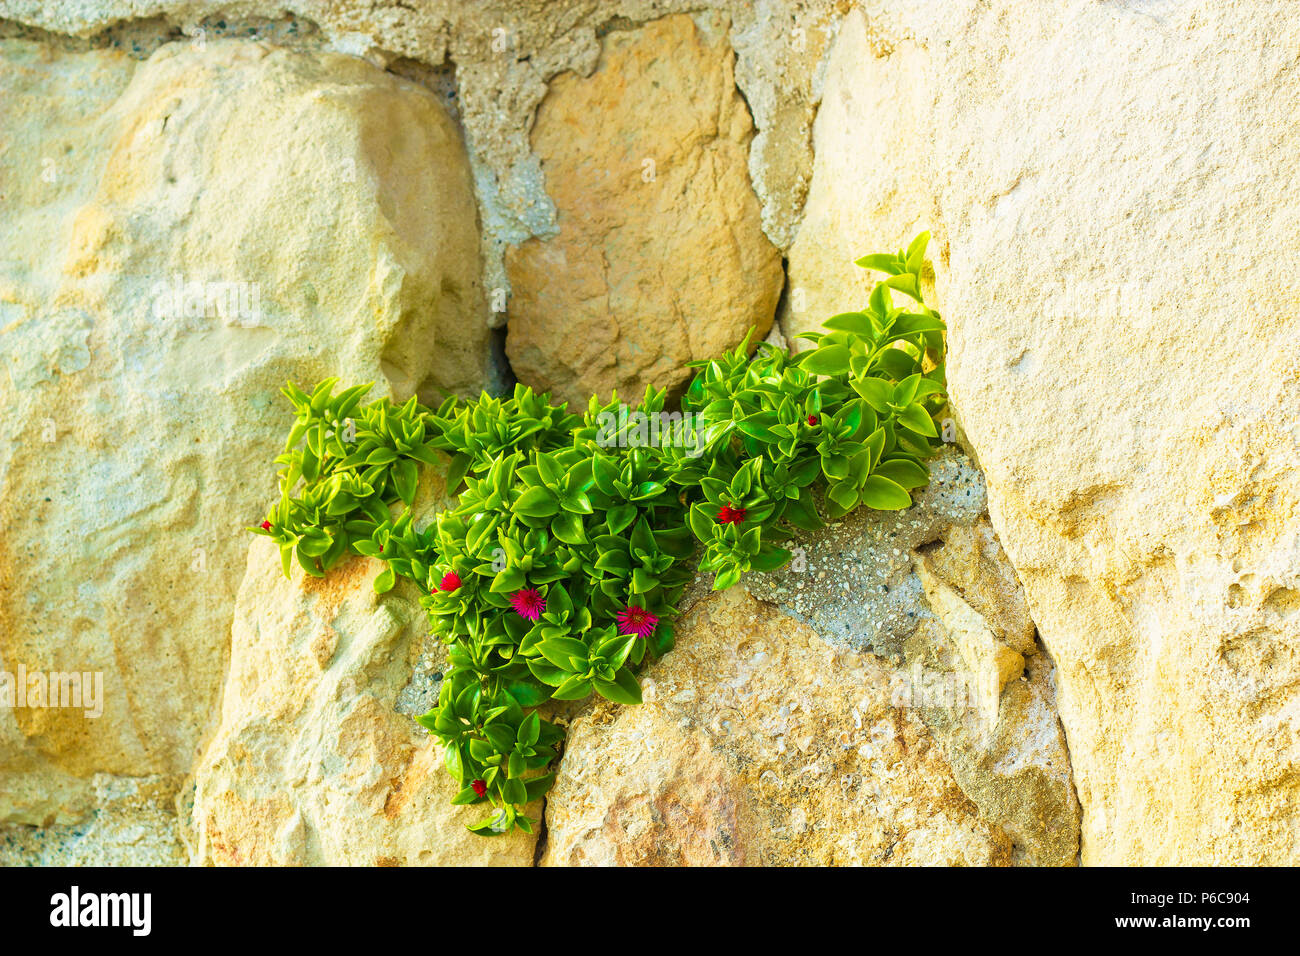 Aptenia cordifolia plant with pink flowers growing on rock. Mesembryanthemum cordifolium with pink flowers, baby sun rose, heartleaf iceplant Stock Photo